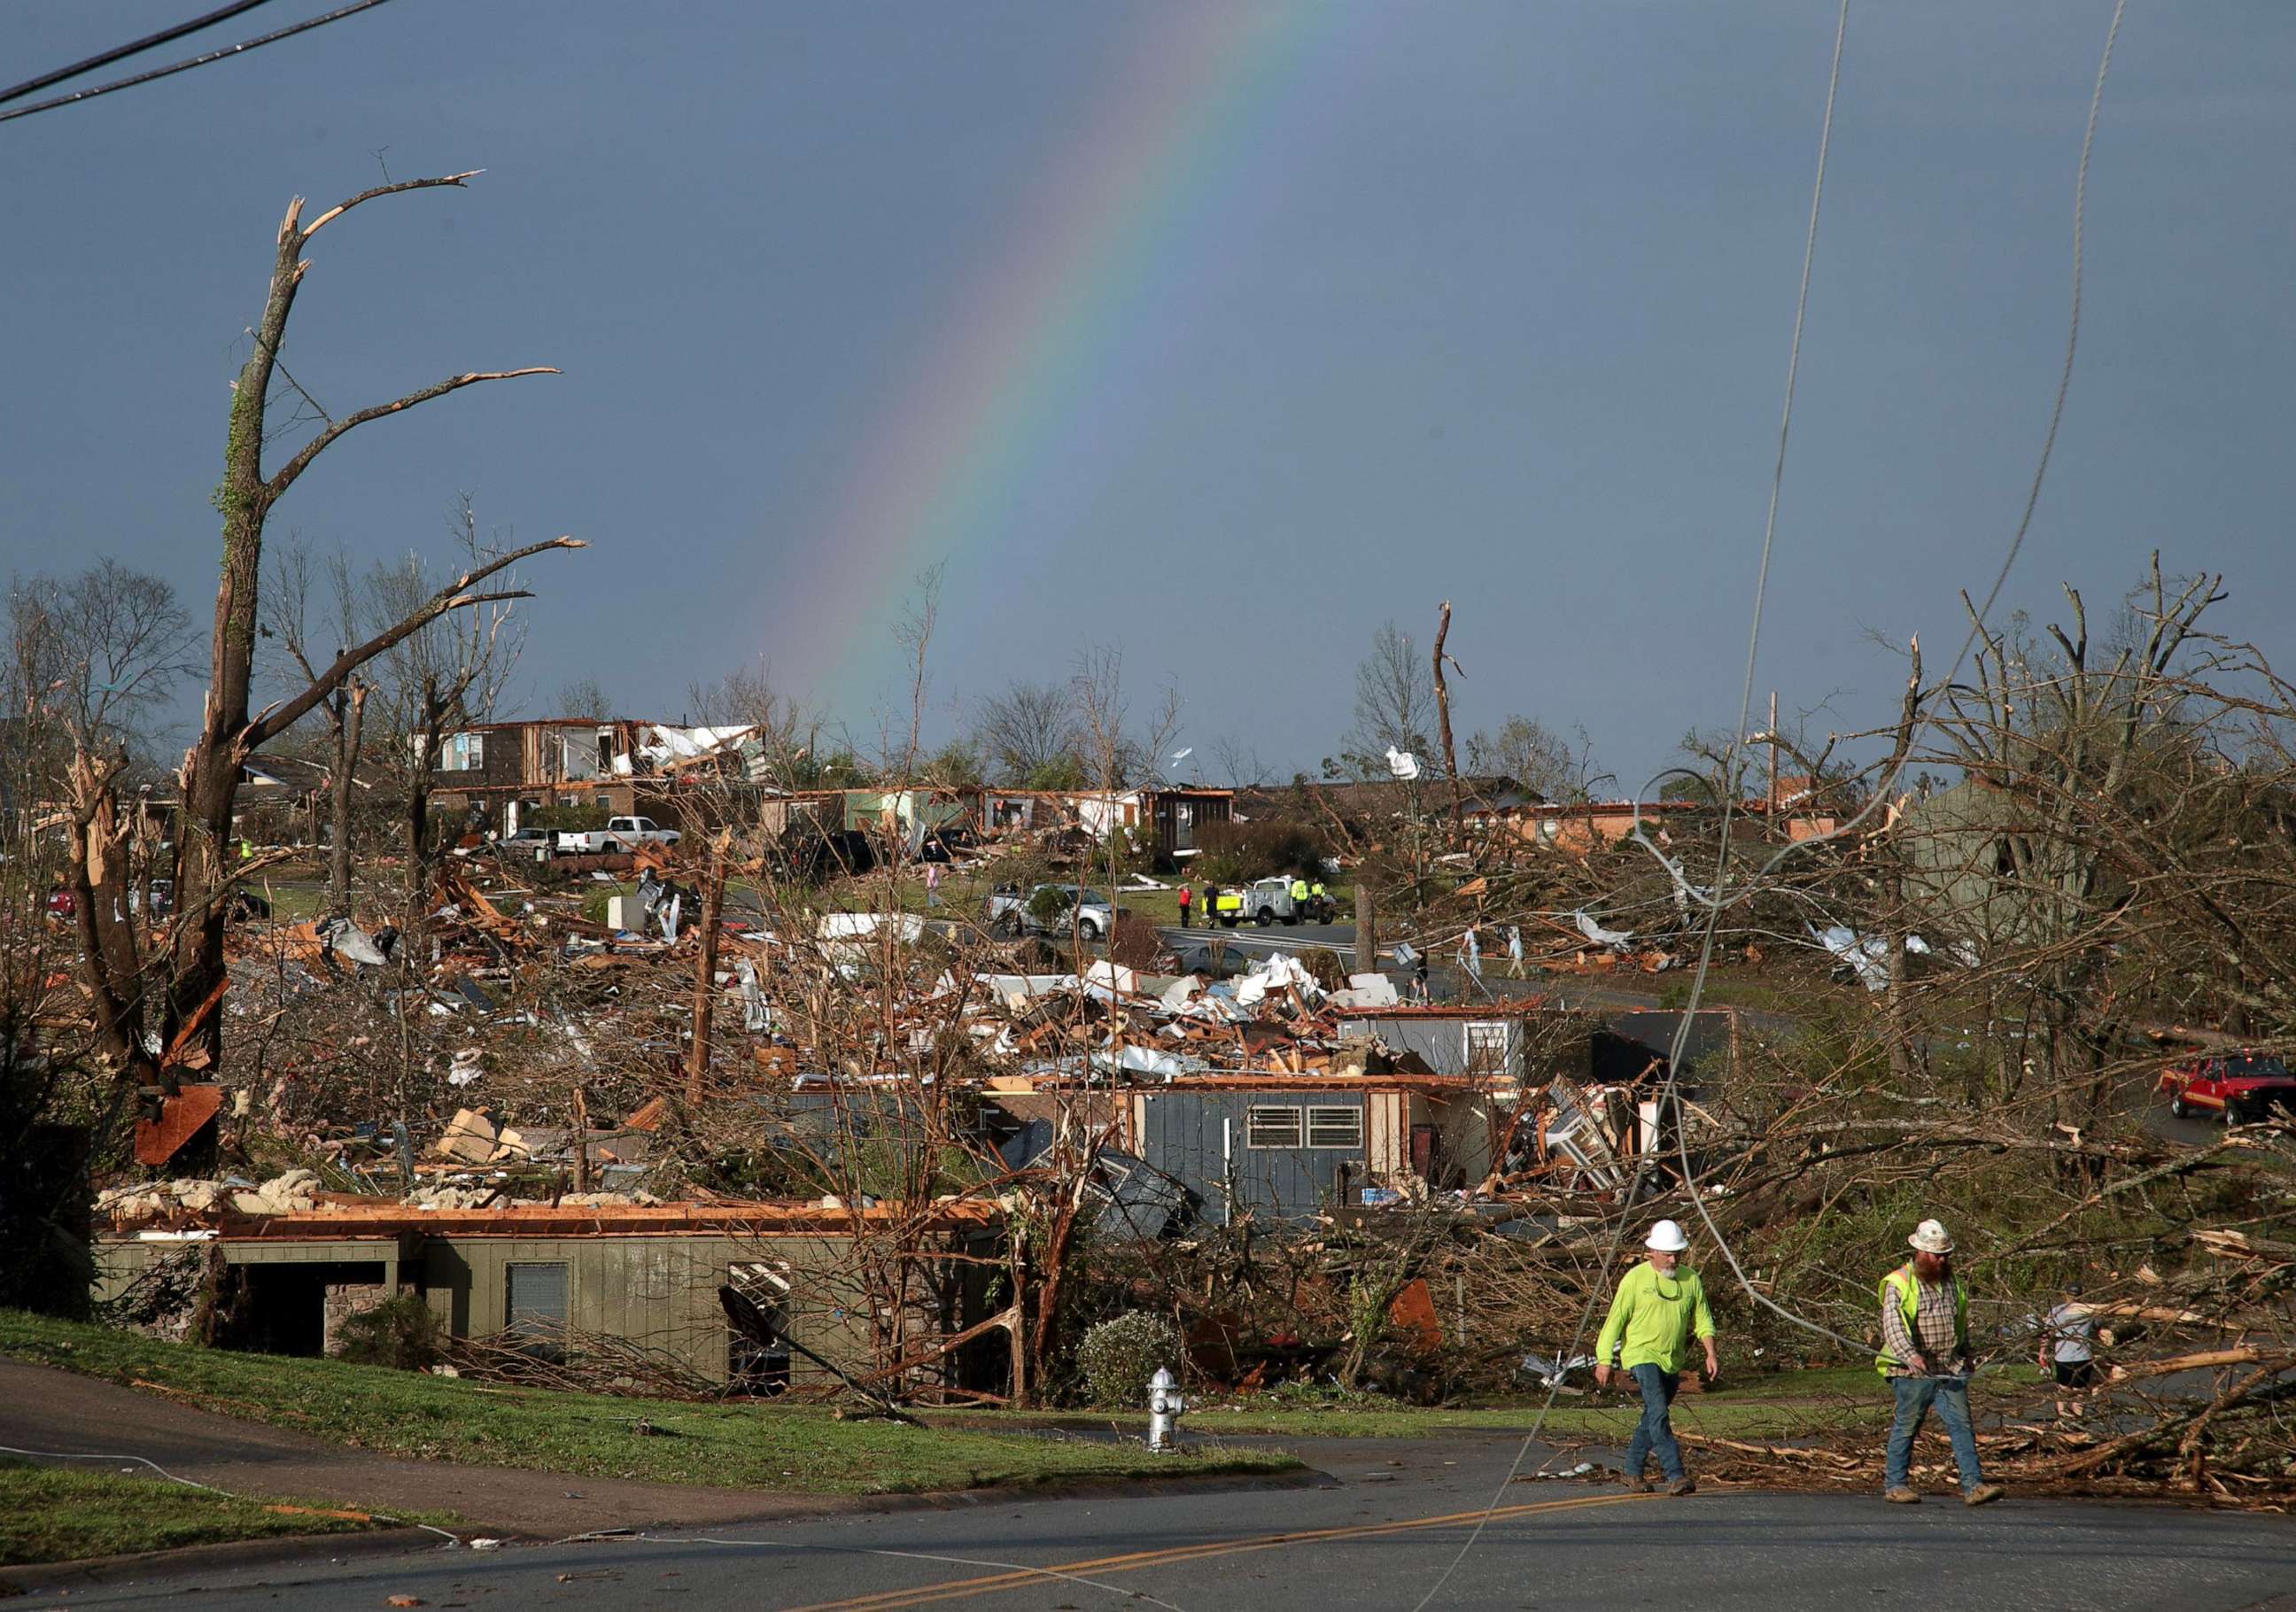 PHOTO: A rainbow shines amidst the remains of a neighborhood damaged by a tornado on March 31, 2023, in Little Rock, Arkansas.